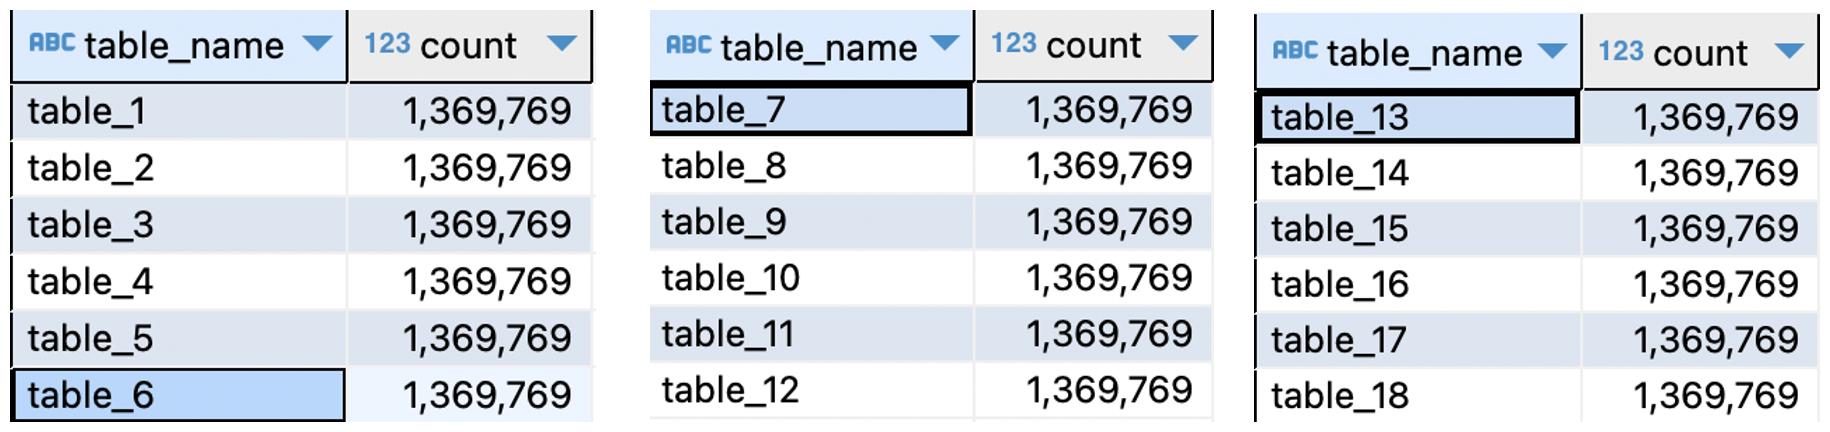 Record volumes (for 18 Tables) in Operational Database